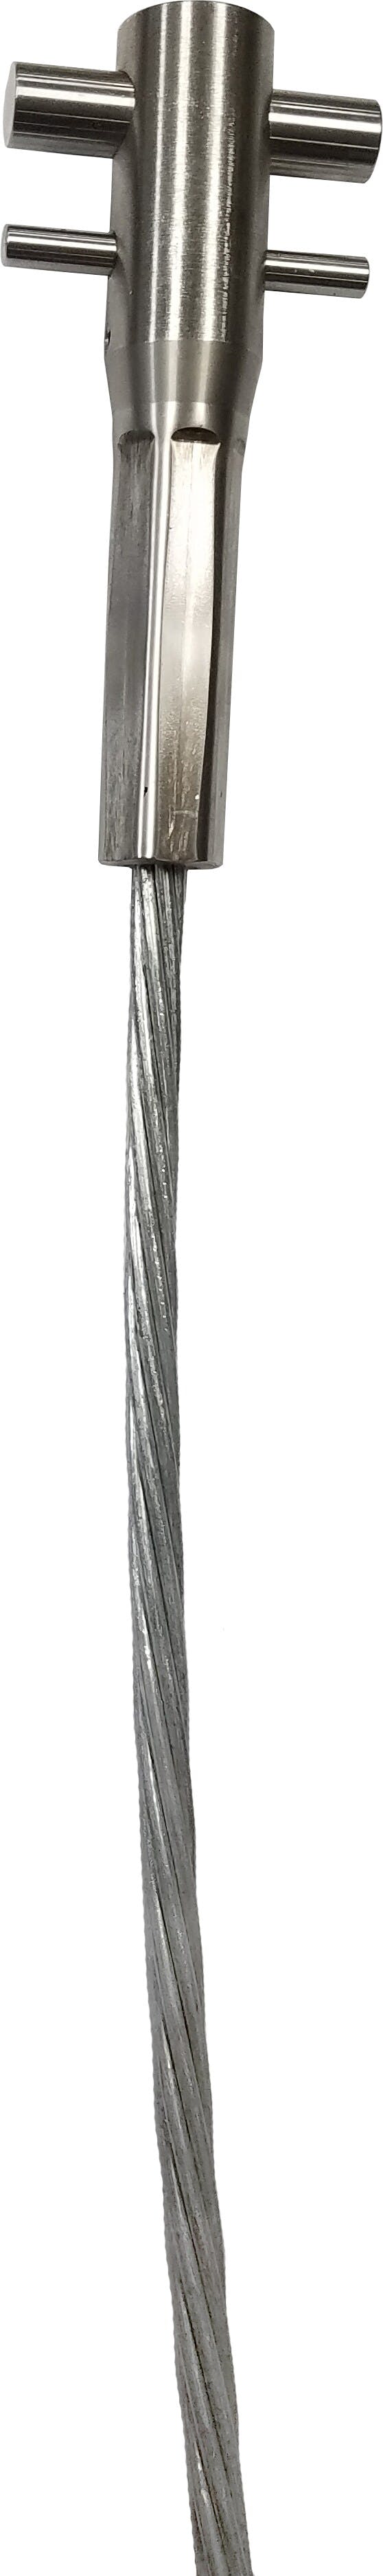 3M™ DBI-SALA® Lad-Saf™ Swaged Cable 6115017, 3/8 Inch, Stainless Steel, 30 m_0